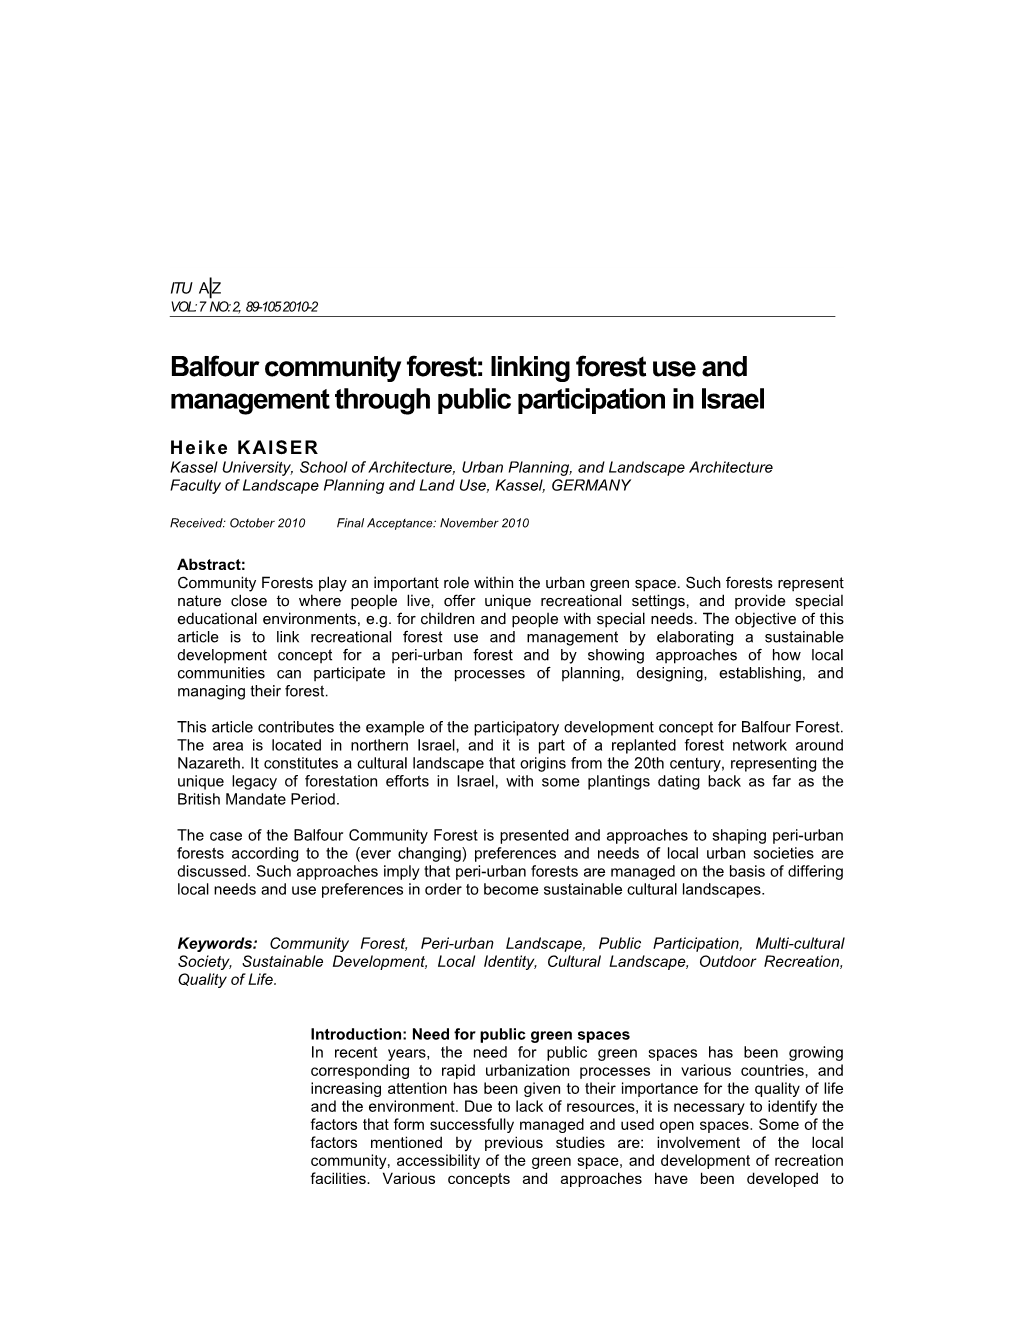 Balfour Community Forest: Linking Forest Use and Management Through Public Participation in Israel